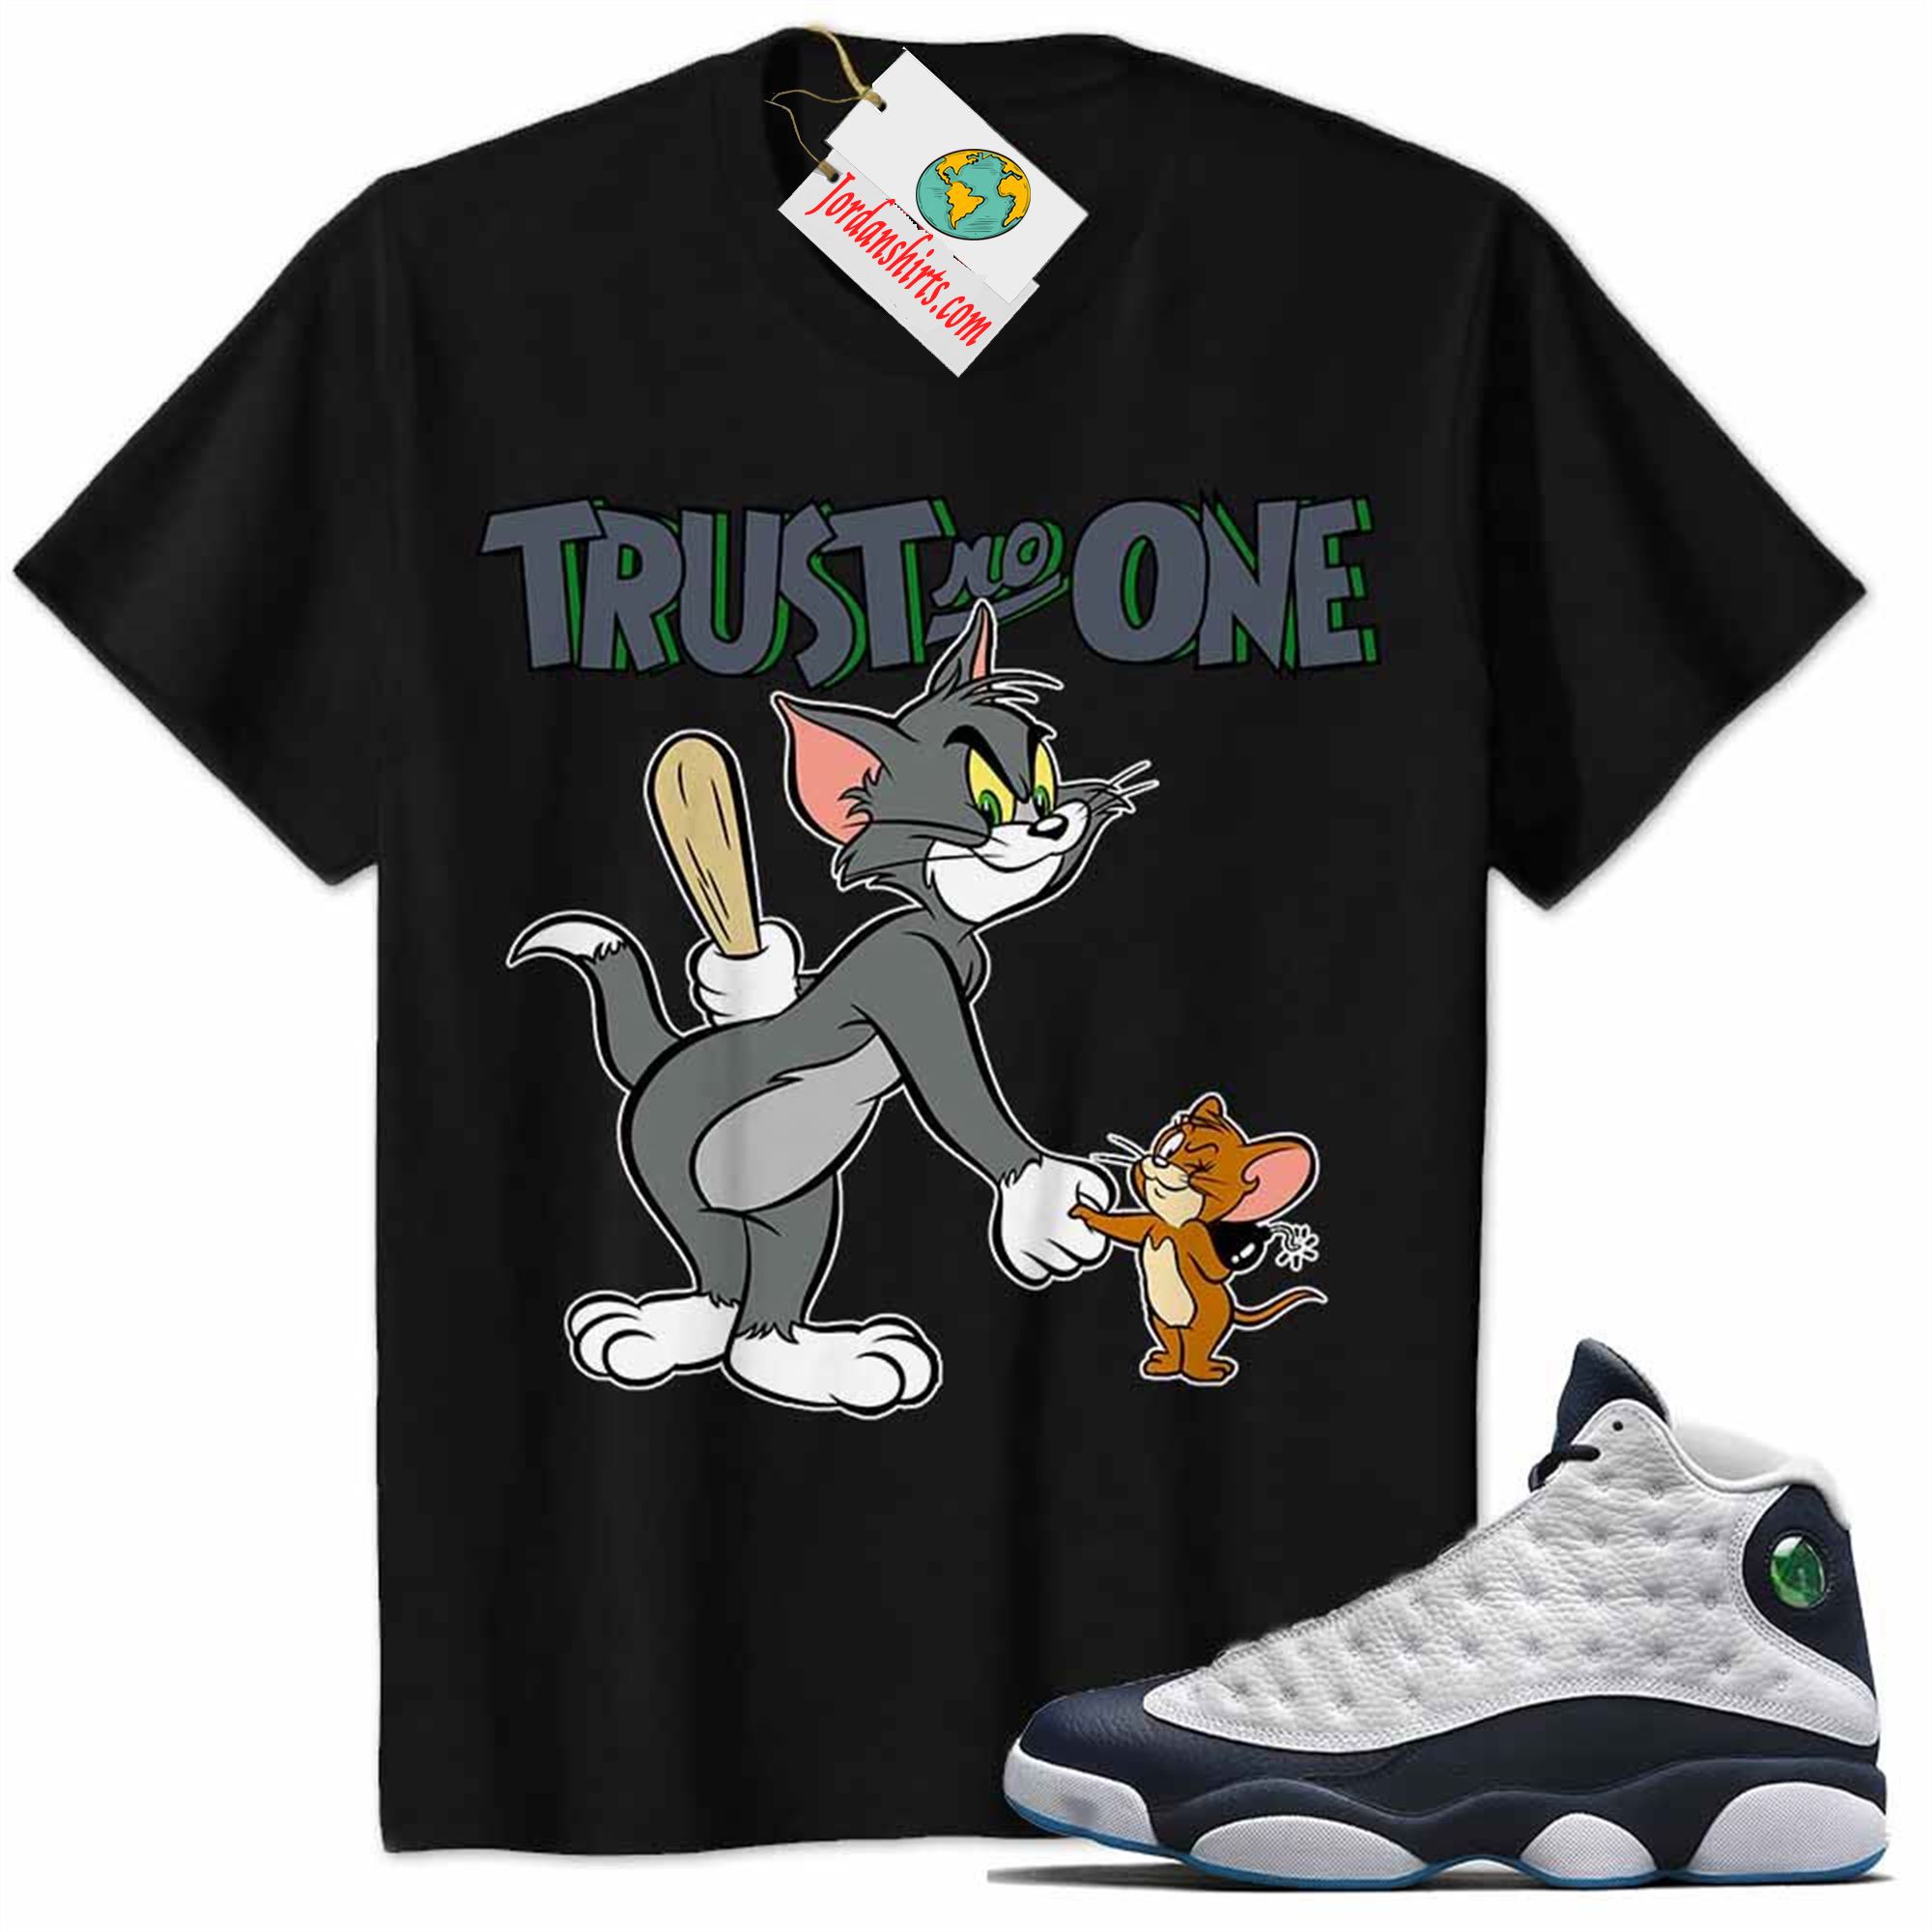 Jordan 13 Shirt, Tom And Jerry Trust No One With Bomb Black Air Jordan 13 Obsidian 13s Plus Size Up To 5xl